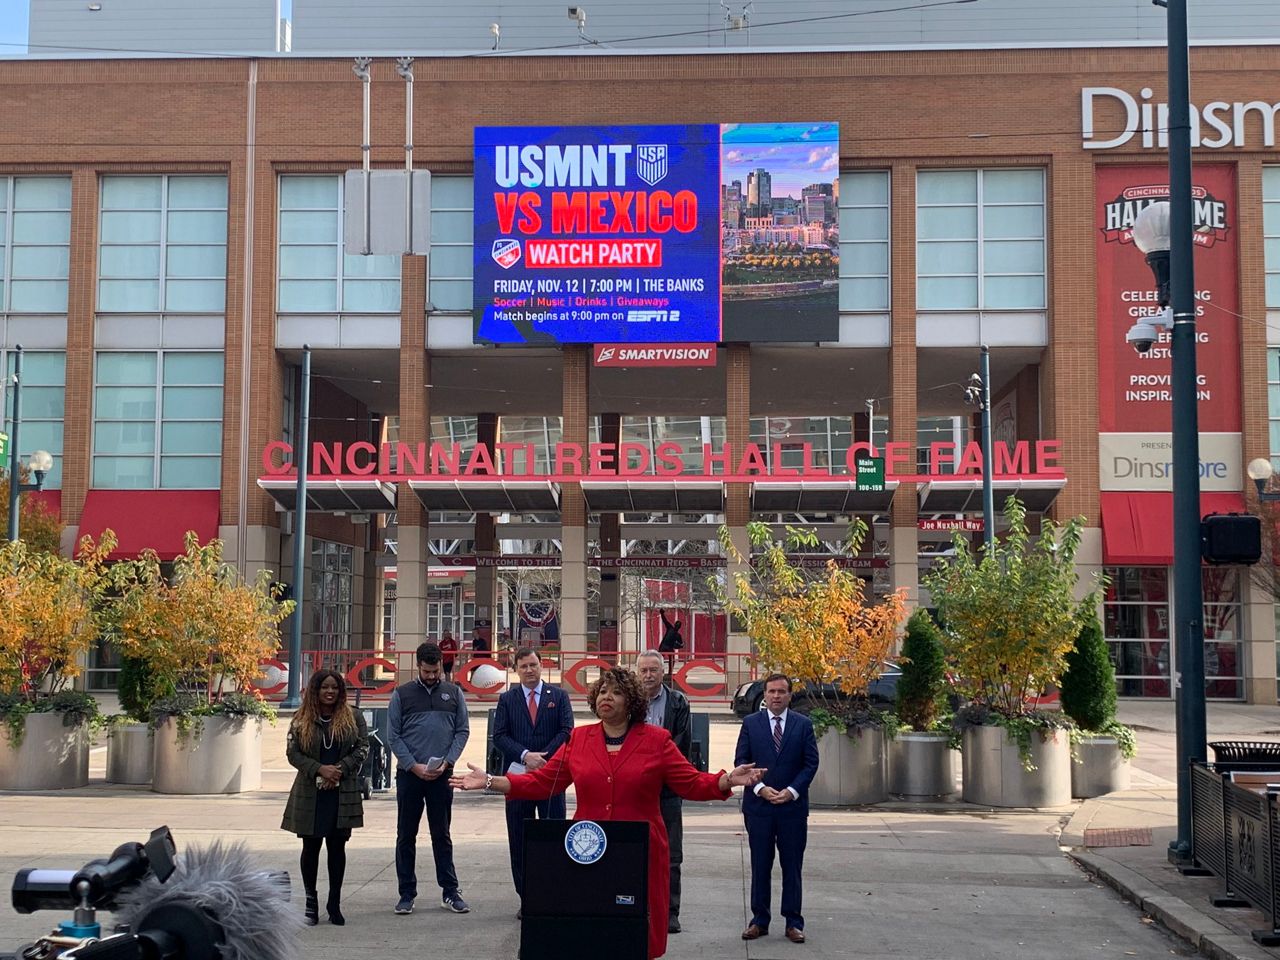 Hamilton County Commissioner Stephanie Summerow Dumas speaks at a press conference about the USA/Mexico match being held in Cincinnati, Ohio, on Nov. 12, 2021. (Spectrum News)